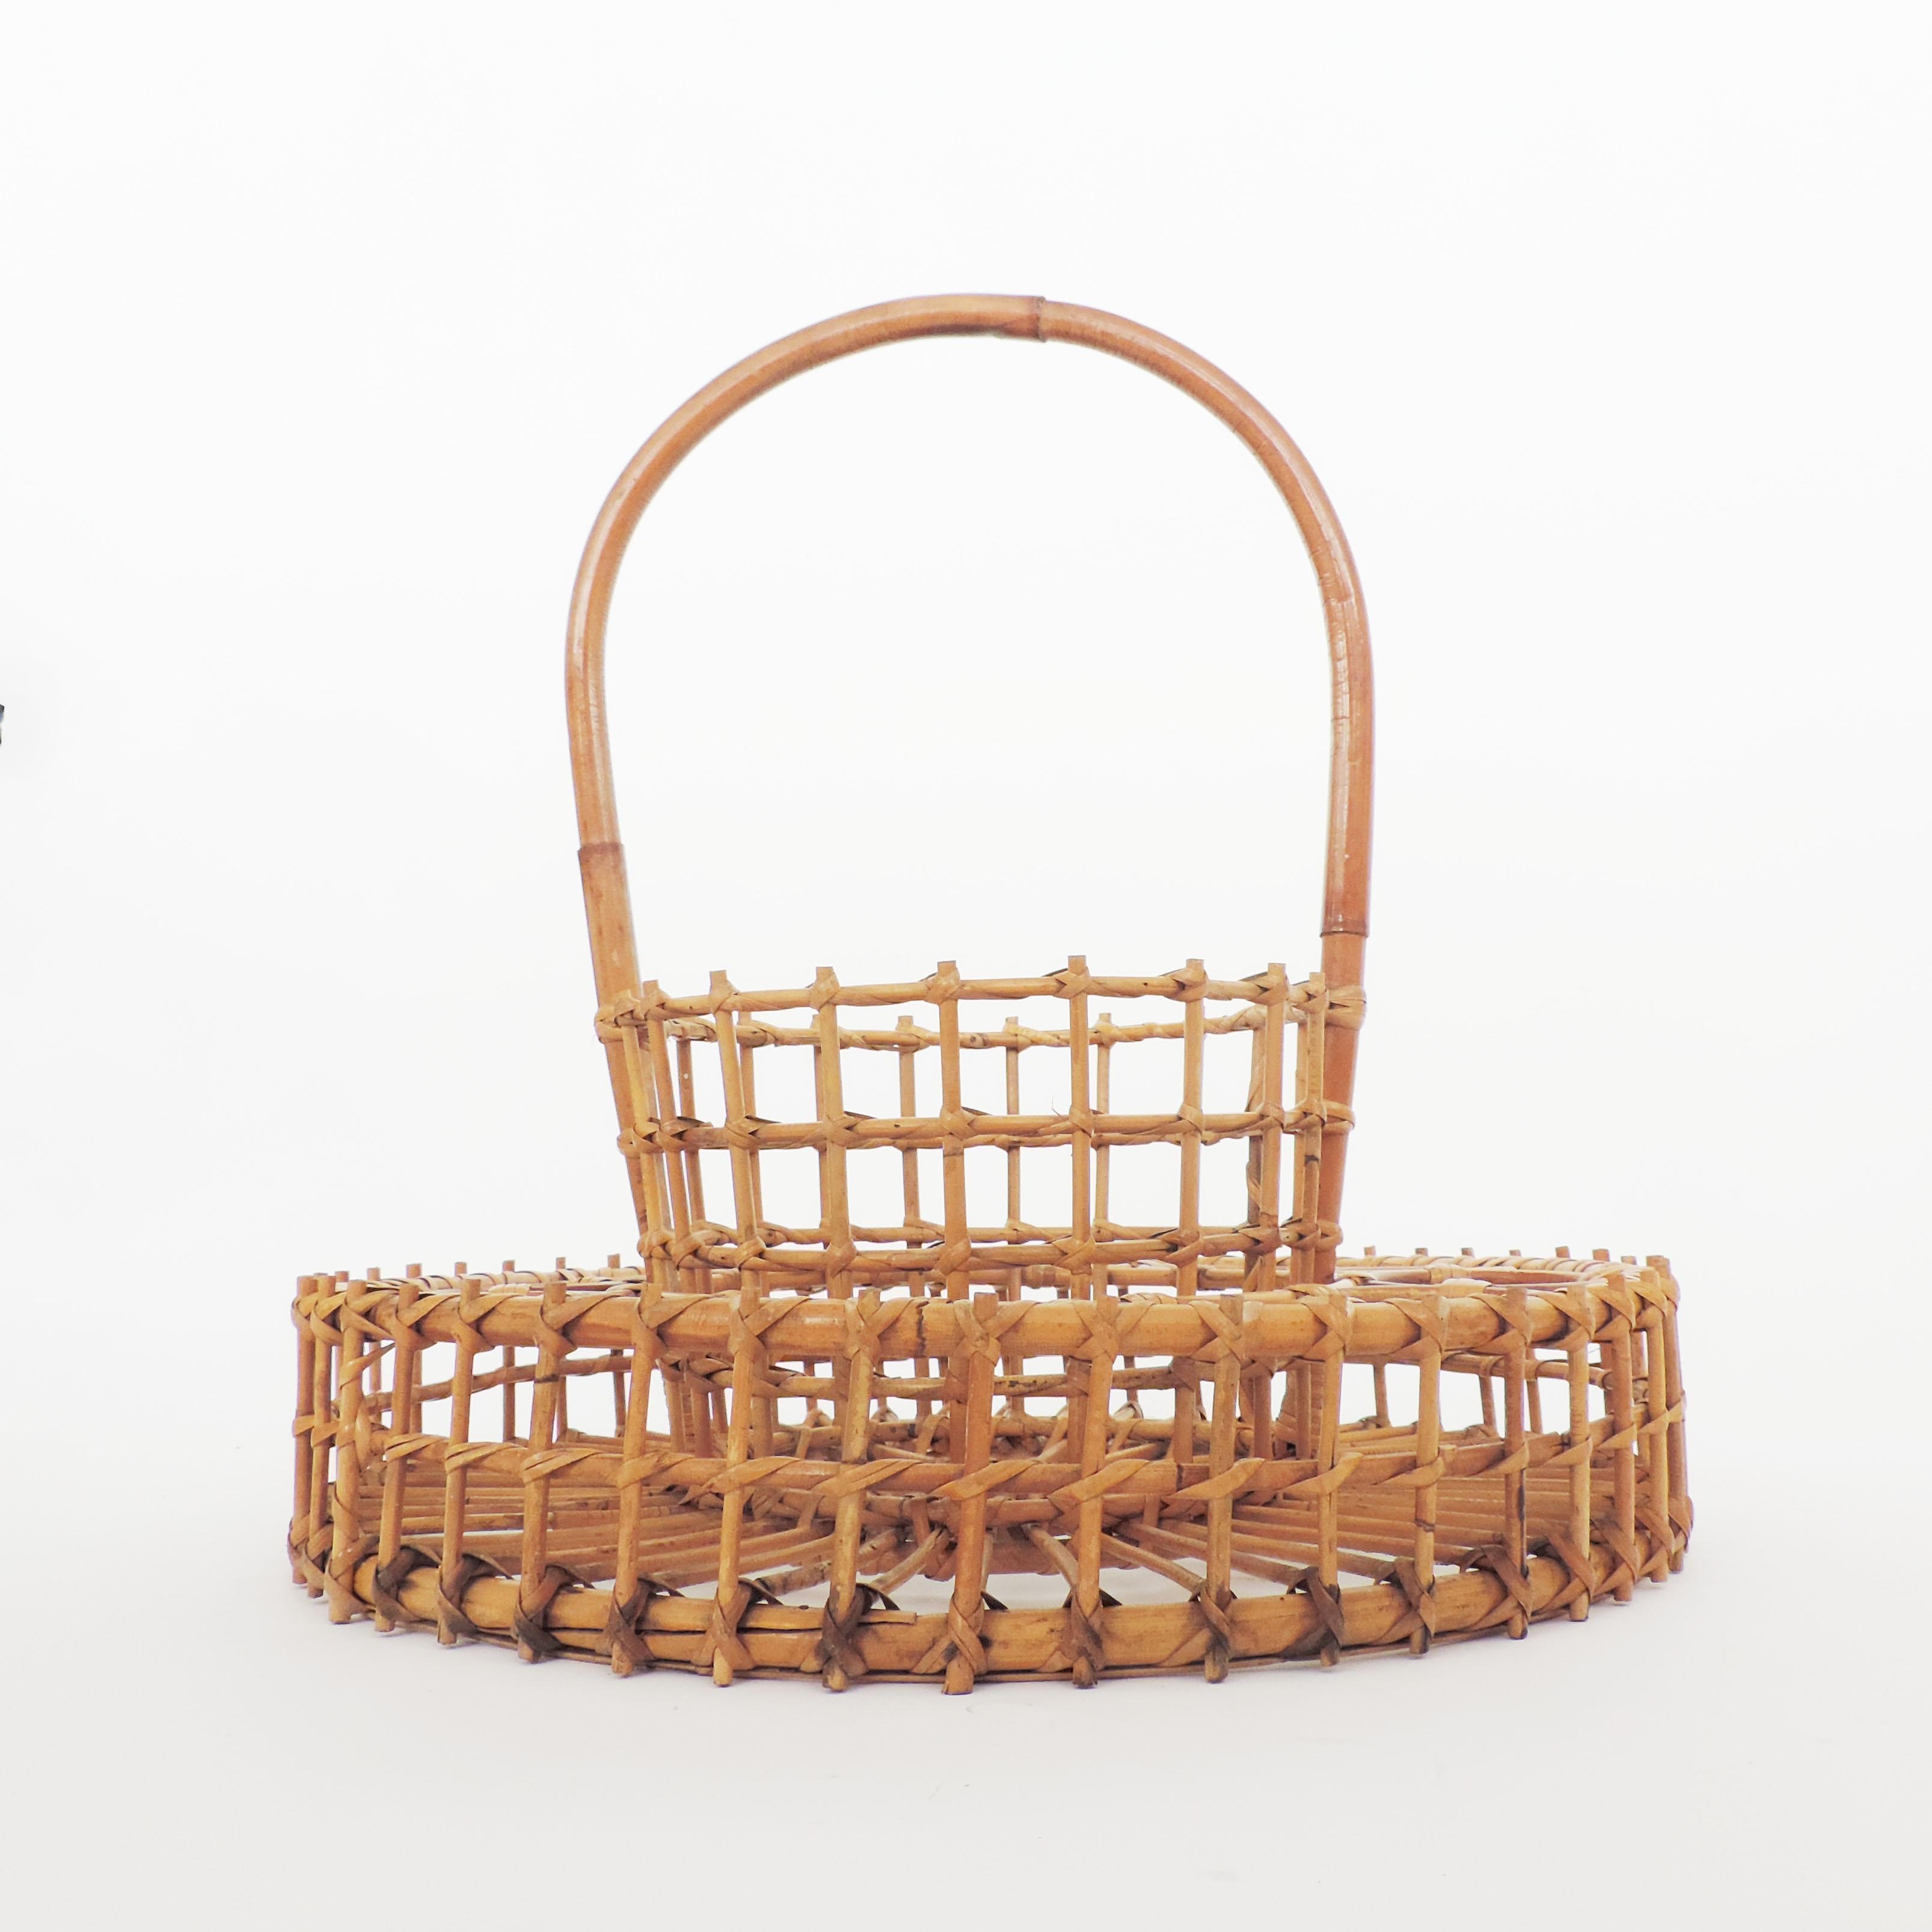 Italian 1950s Bamboo and Wicker portable drinks tray.
Superb Swimming Pool Help.